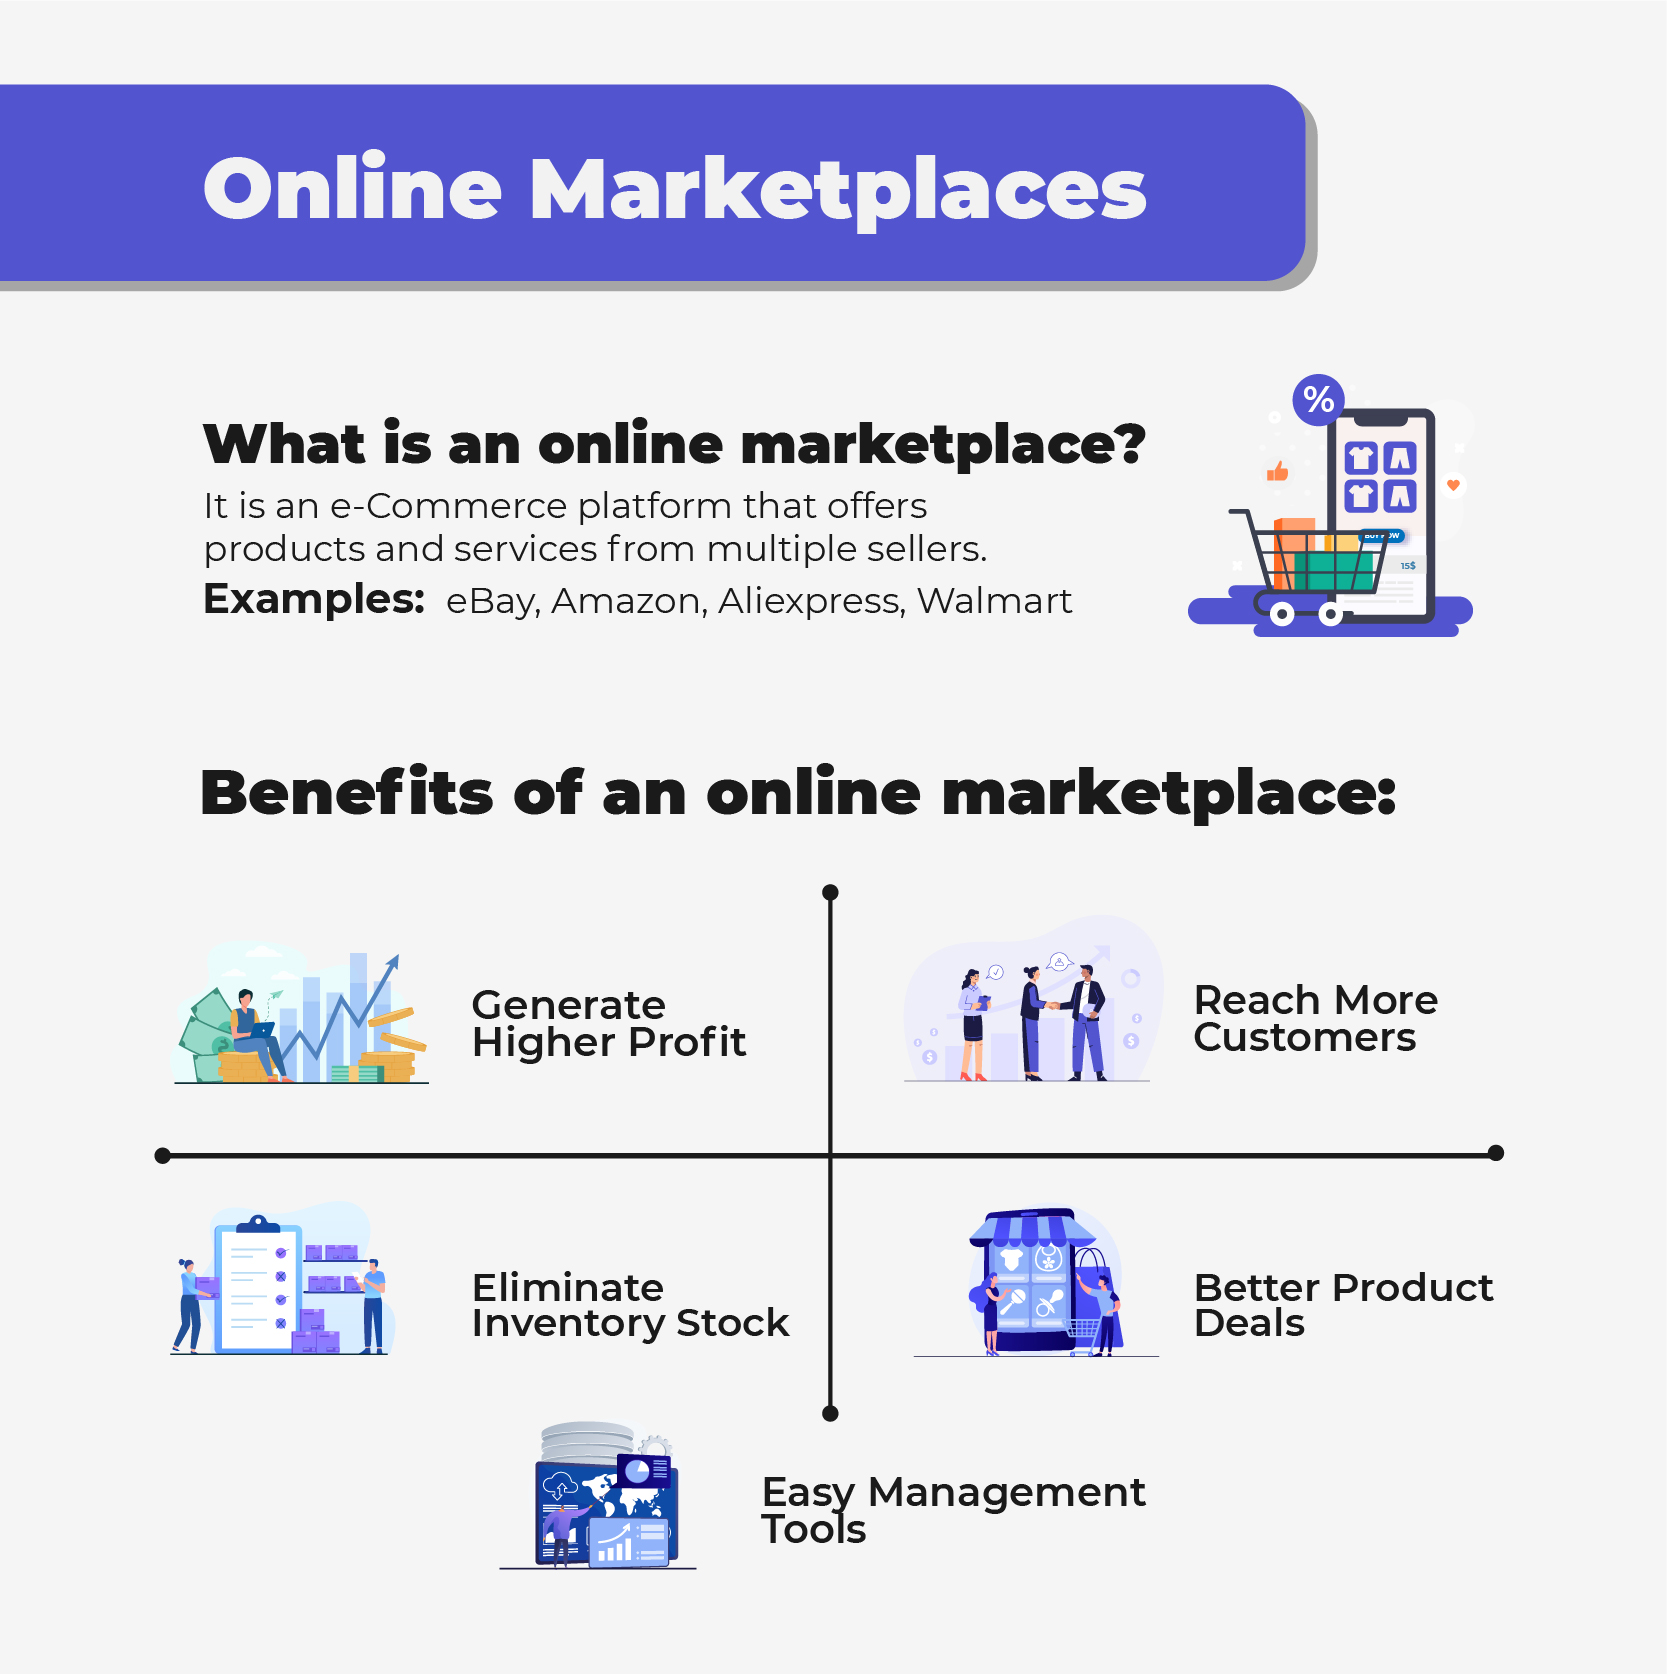 What is an online marketplace and what benefits it offers